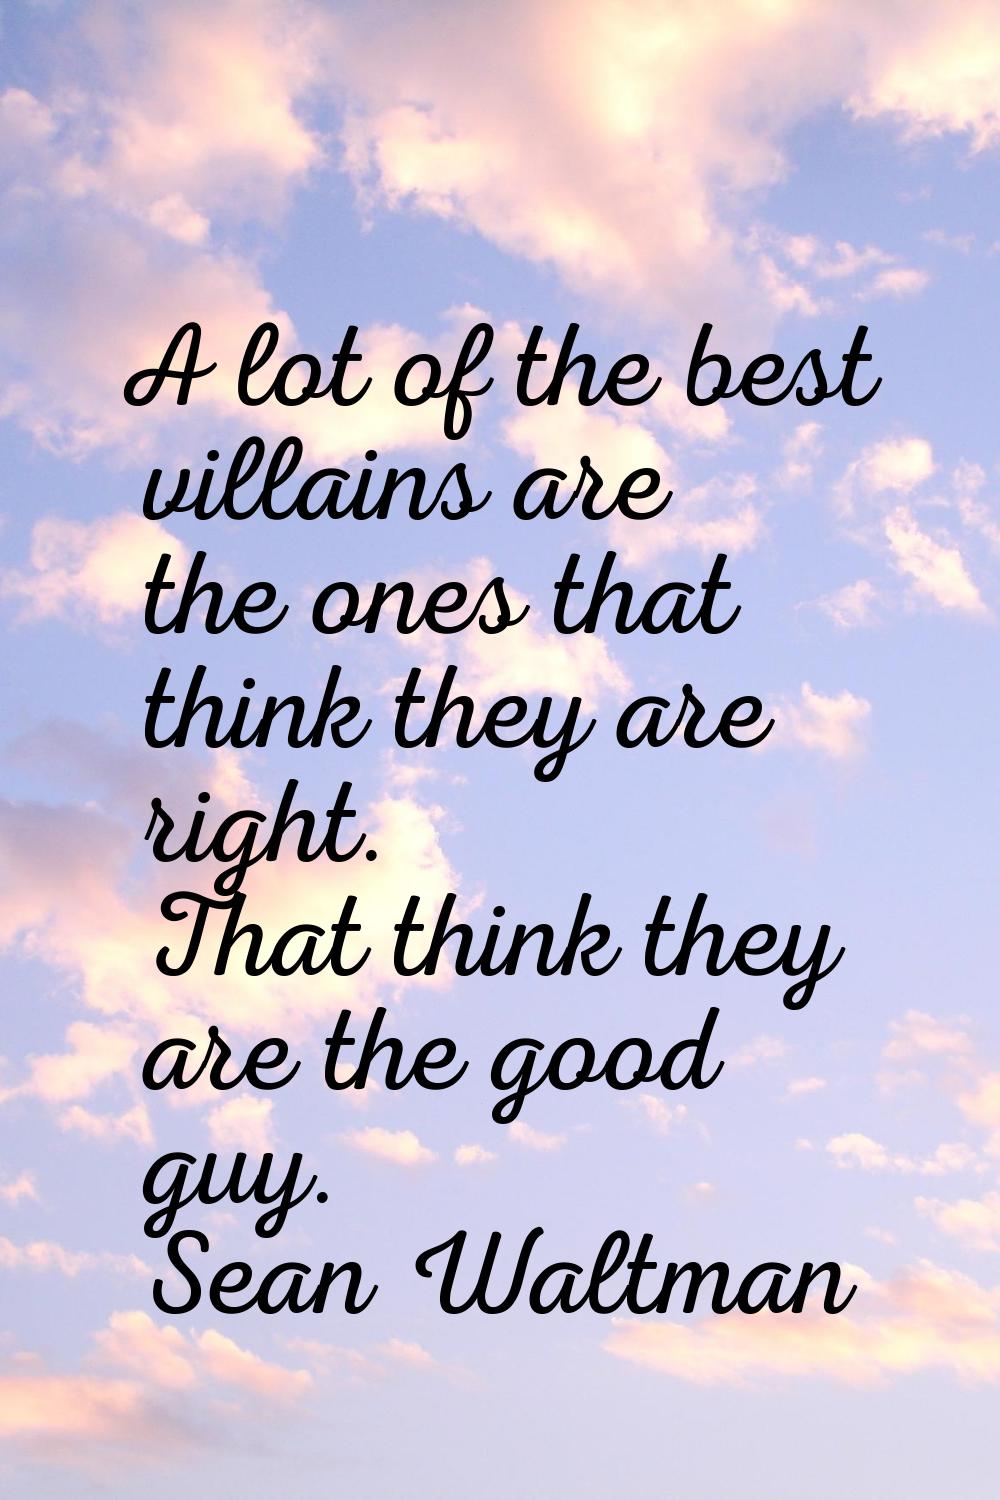 A lot of the best villains are the ones that think they are right. That think they are the good guy